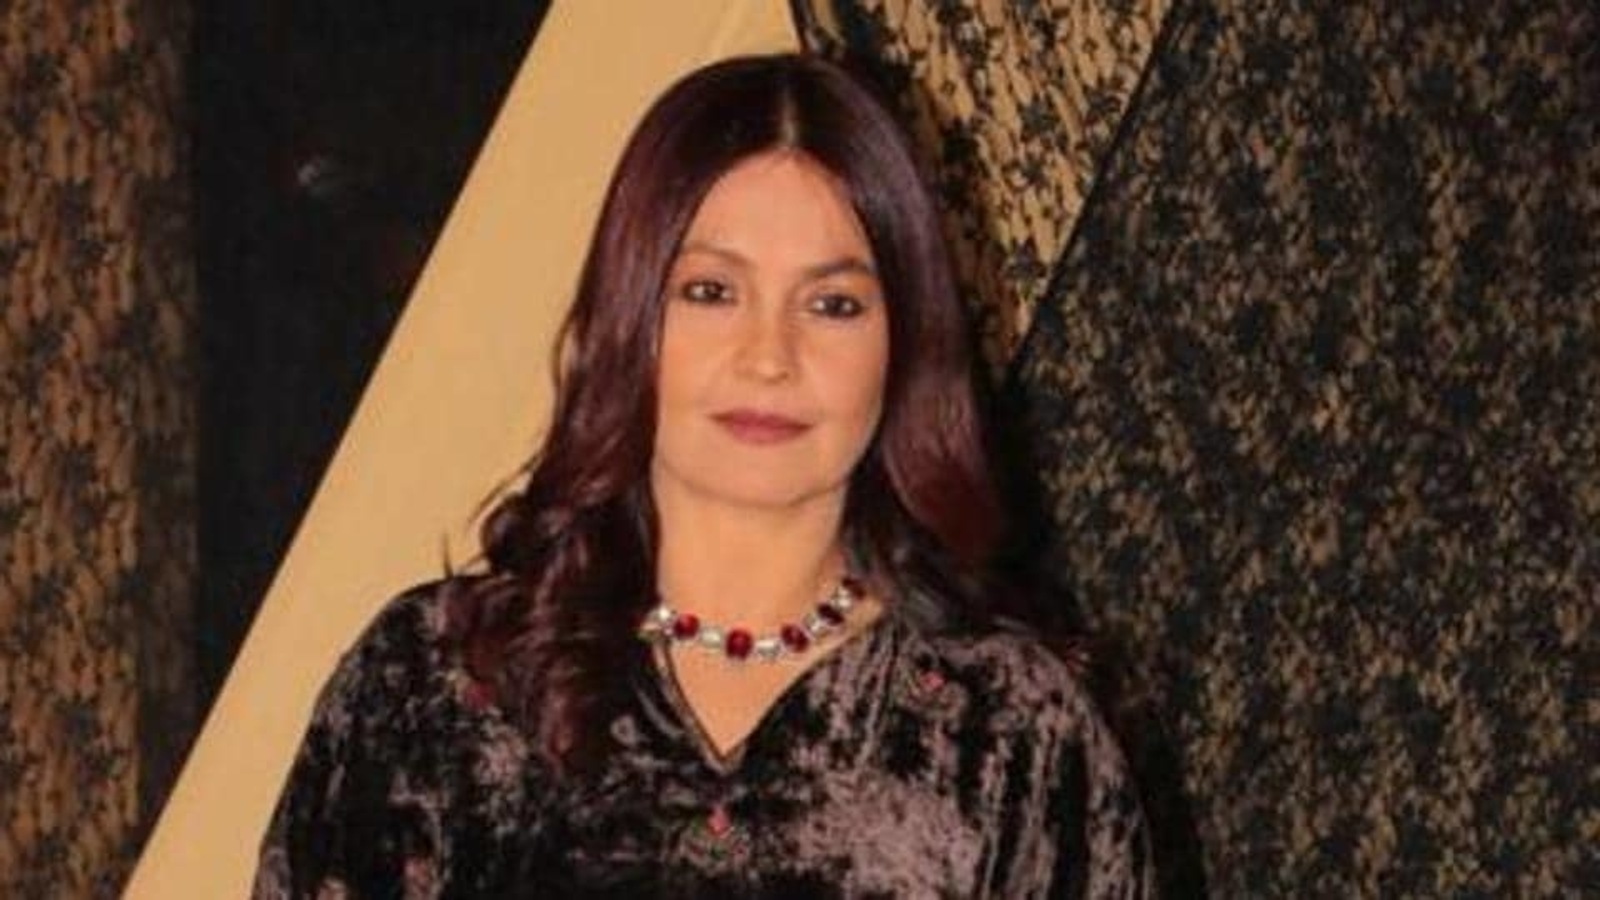 Pooja Bhatt Ka X Video Dekhna - Pooja Bhatt opens up about battling alcoholism, says she didn't want to  'cover' it up | Bollywood - Hindustan Times